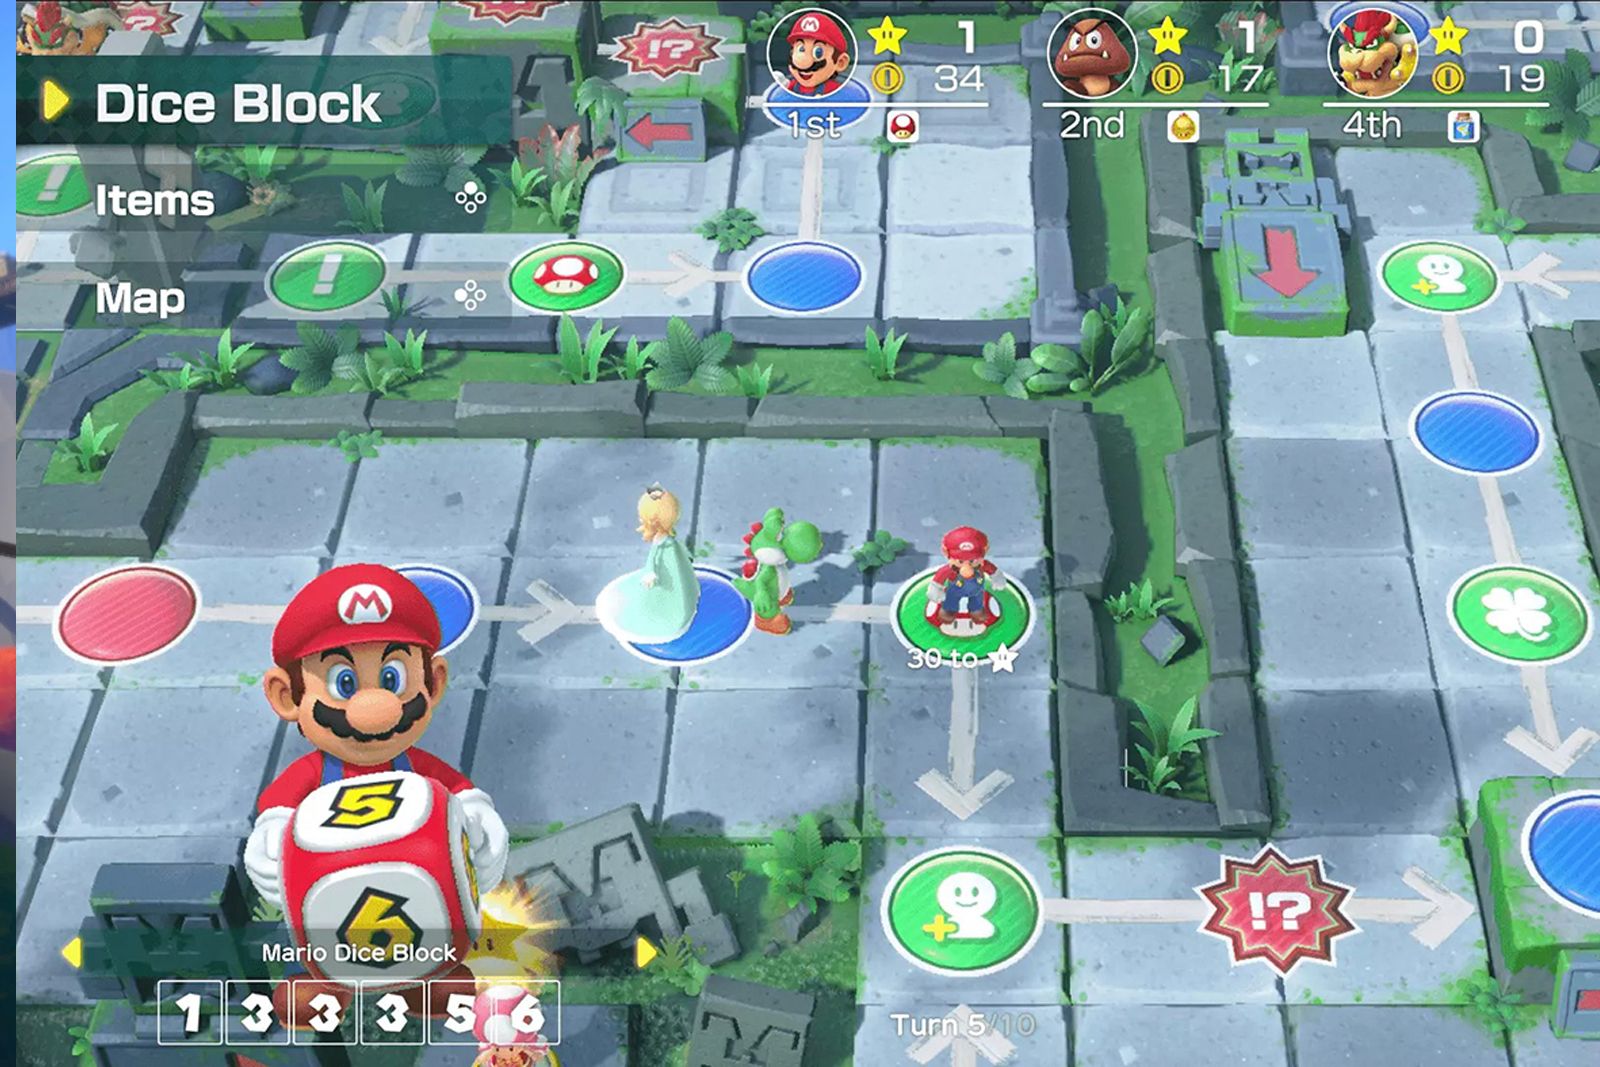 Mario Party Superstars for Nintendo Switch: Ultimate guide